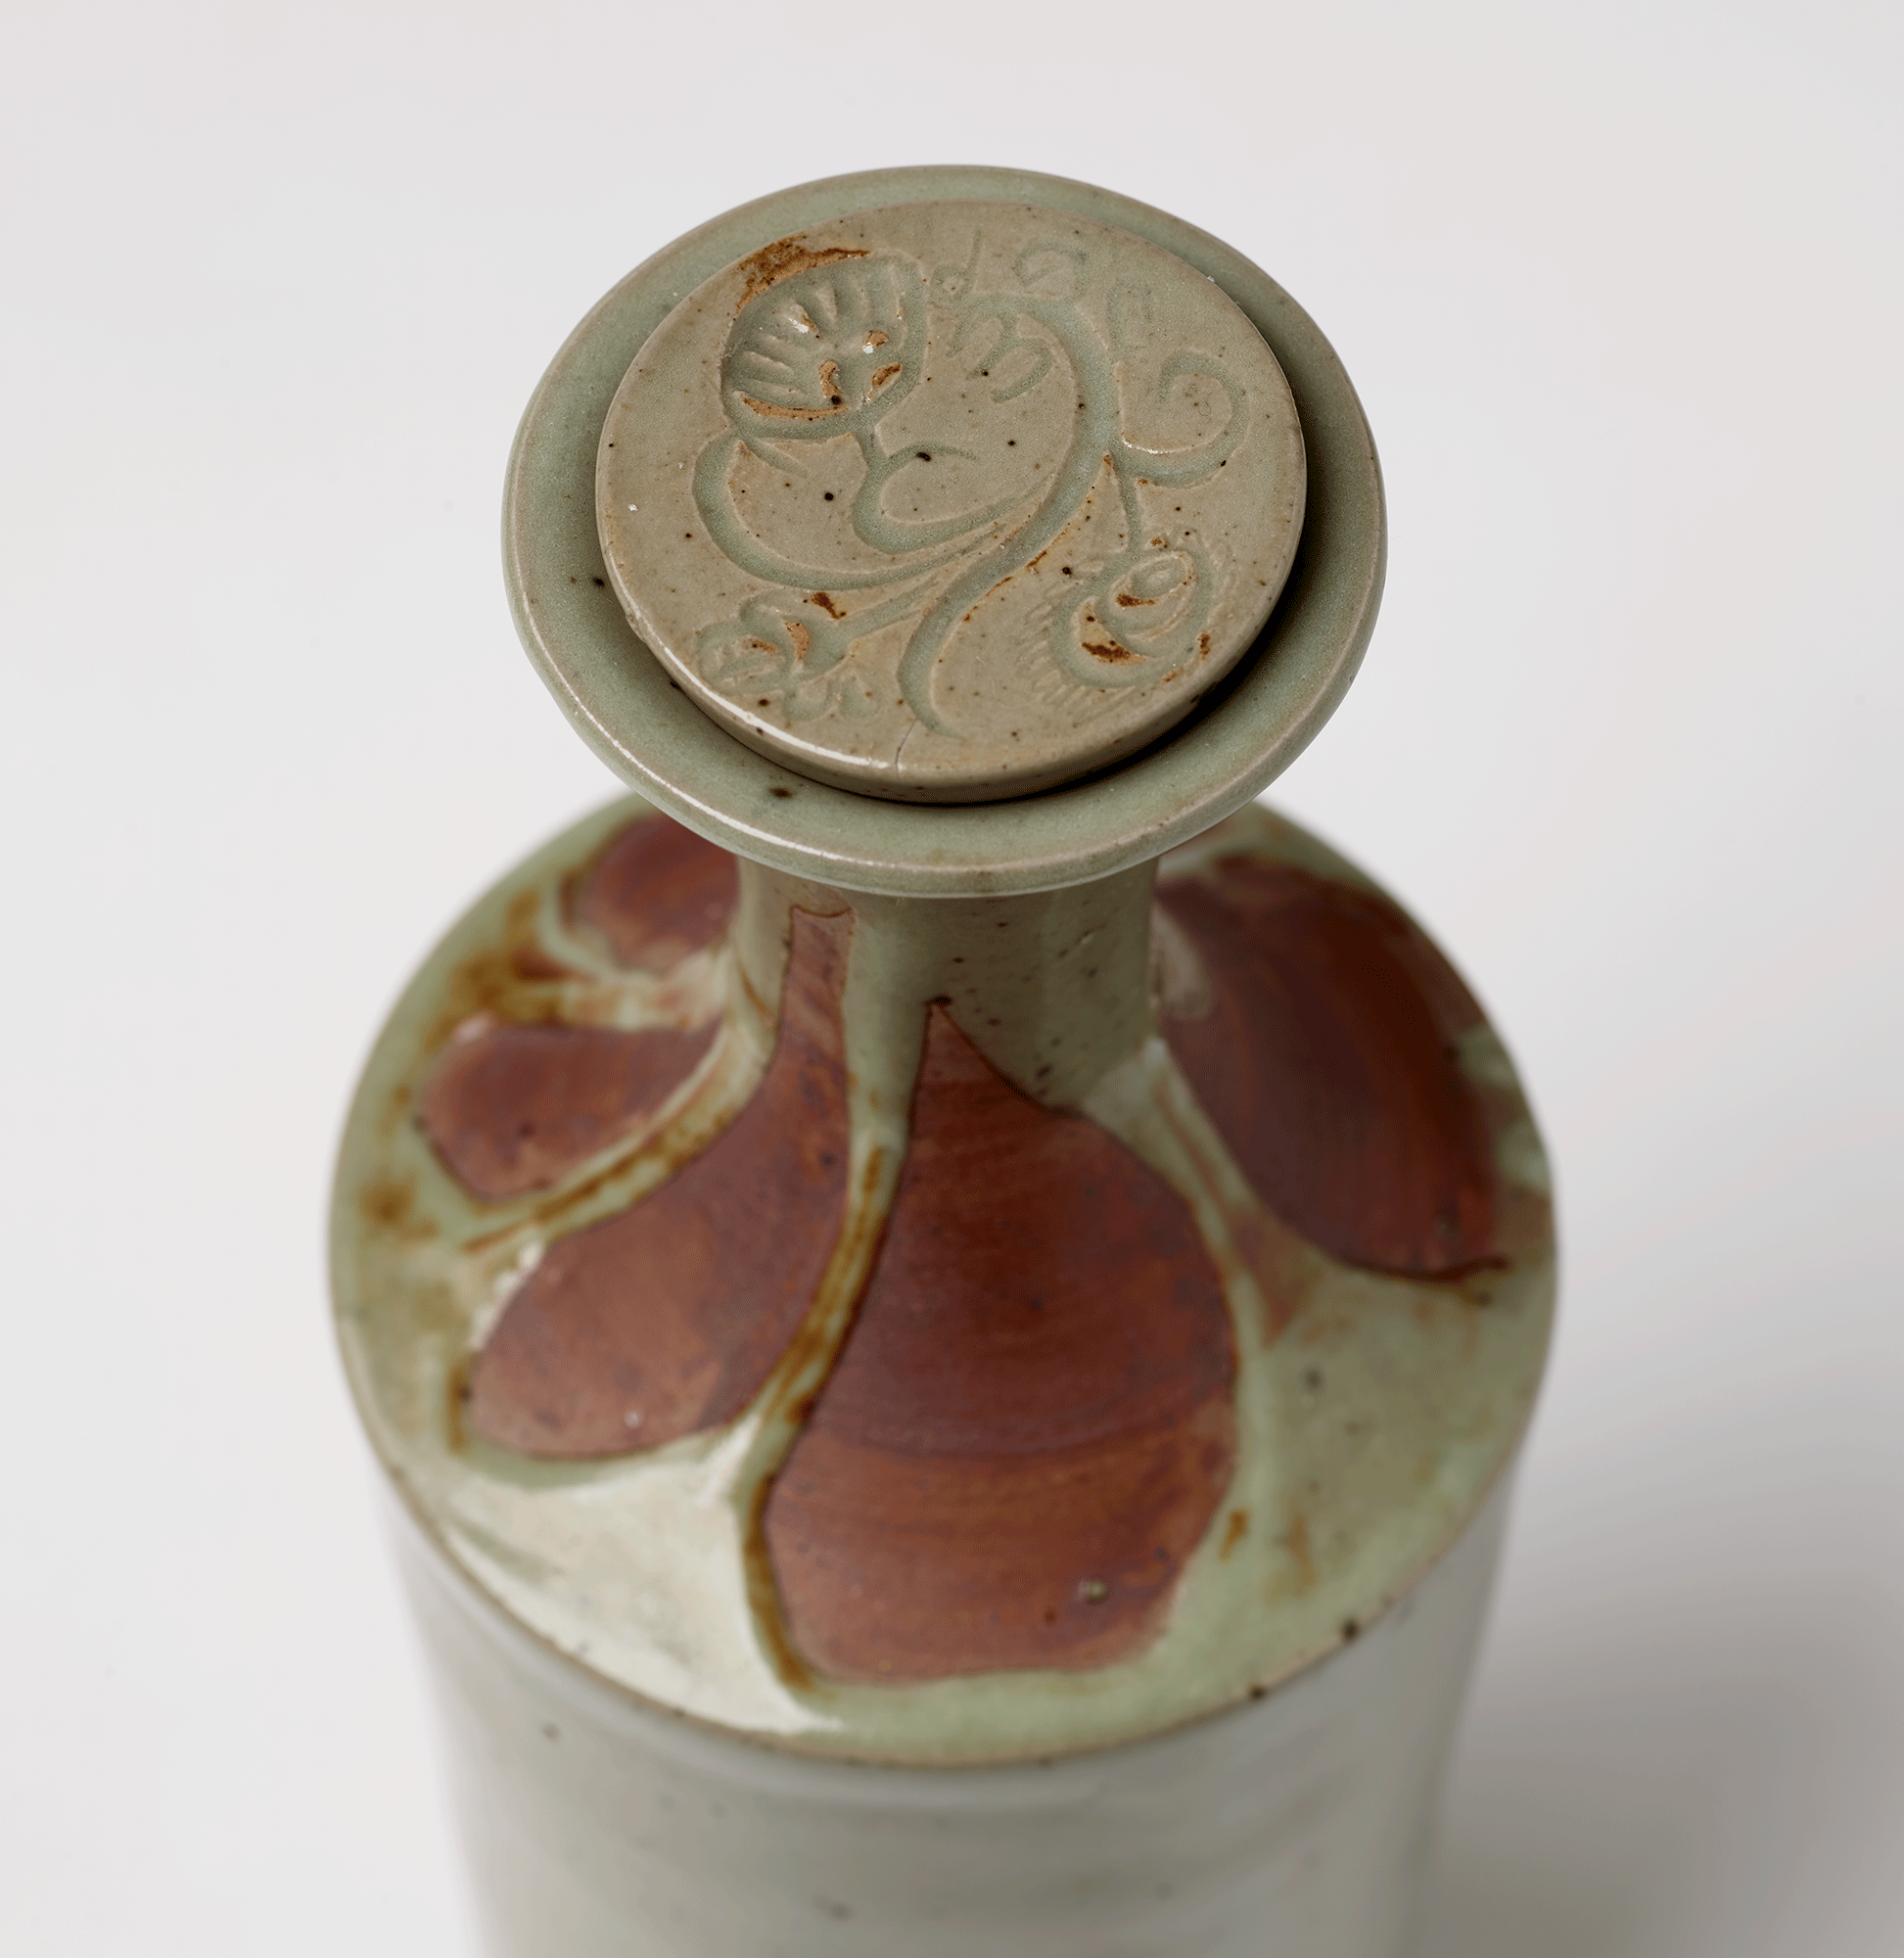 Detail of the top of the decanter. Rust colored petal shapes are carved into light green clay ground. Curving flower design on bottle lid.